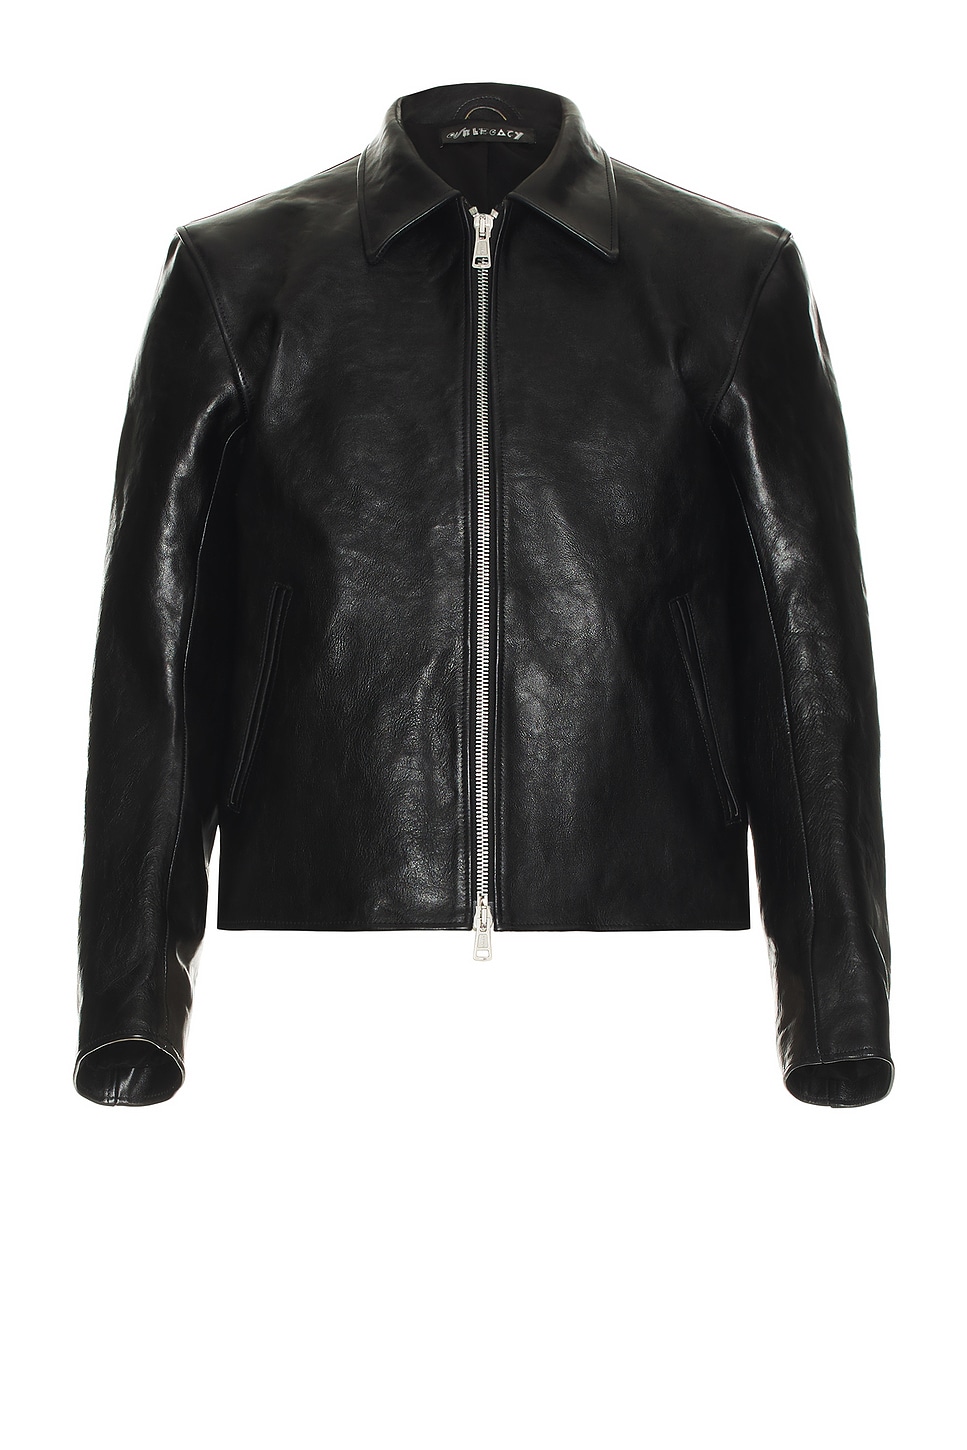 Image 1 of Our Legacy Mini Jacket in Top Dyed Black Leather